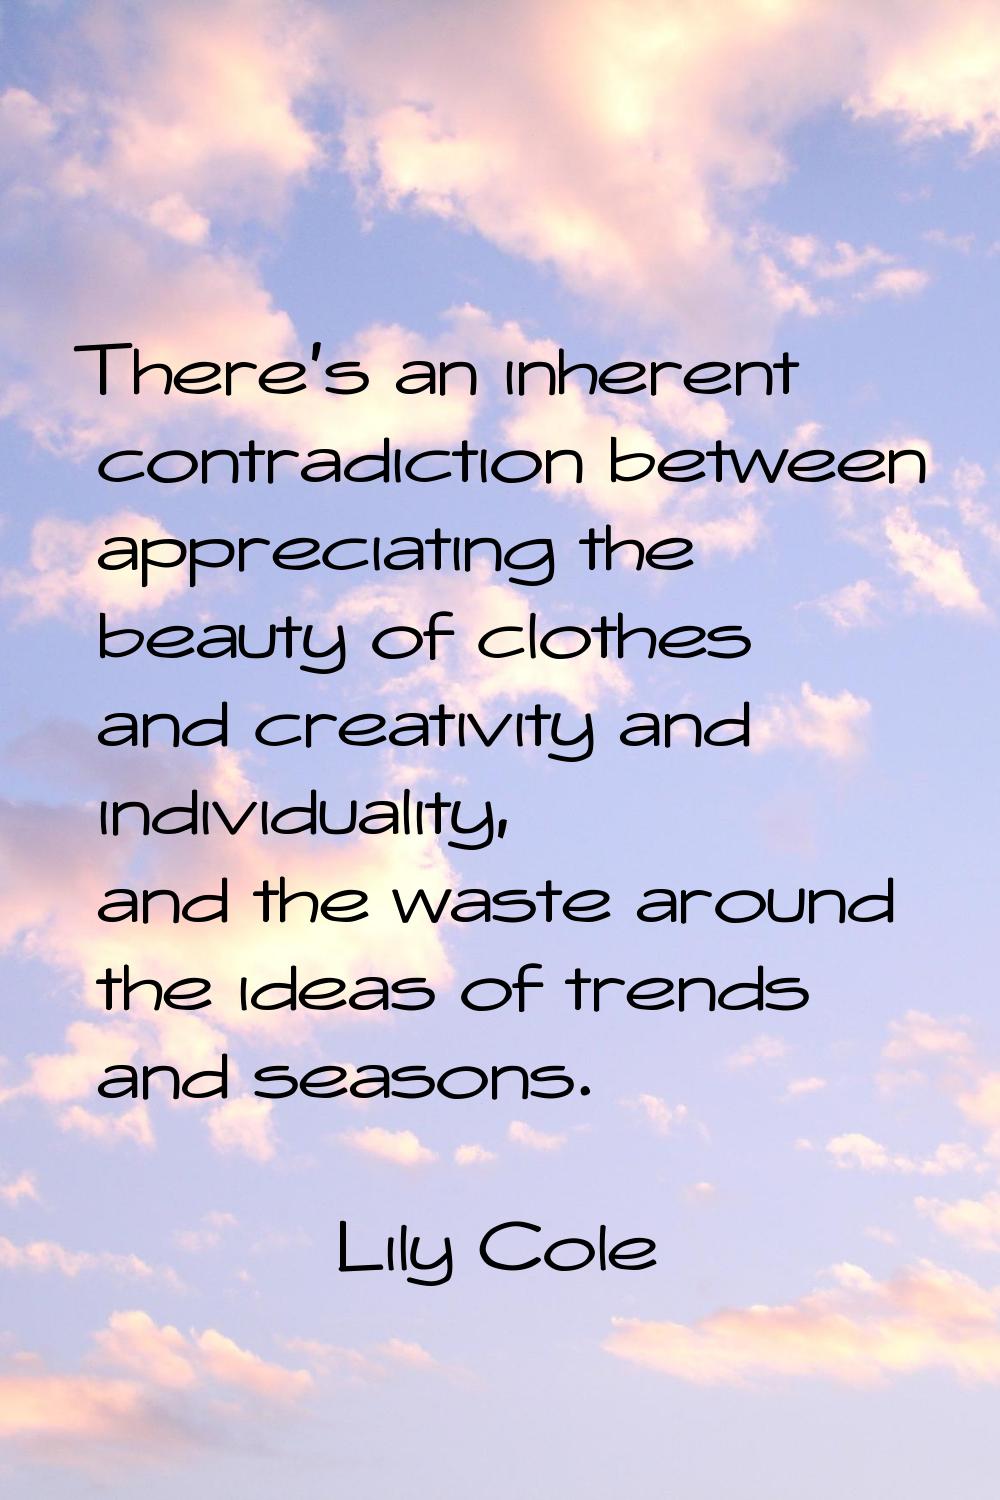 There's an inherent contradiction between appreciating the beauty of clothes and creativity and ind